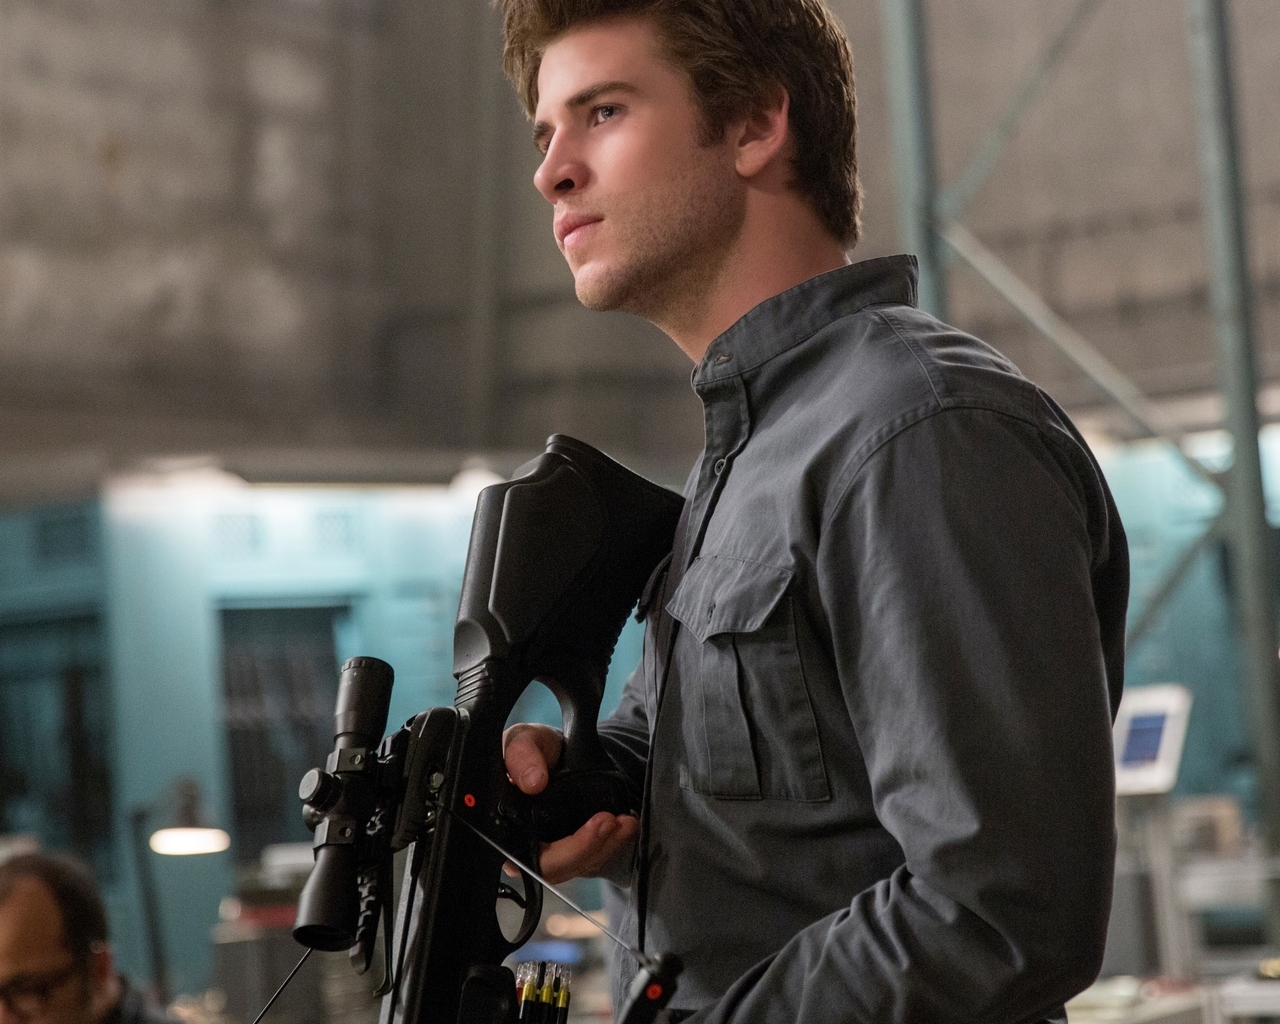 Liam Hemsworth in The Hunger Games for 1280 x 1024 resolution